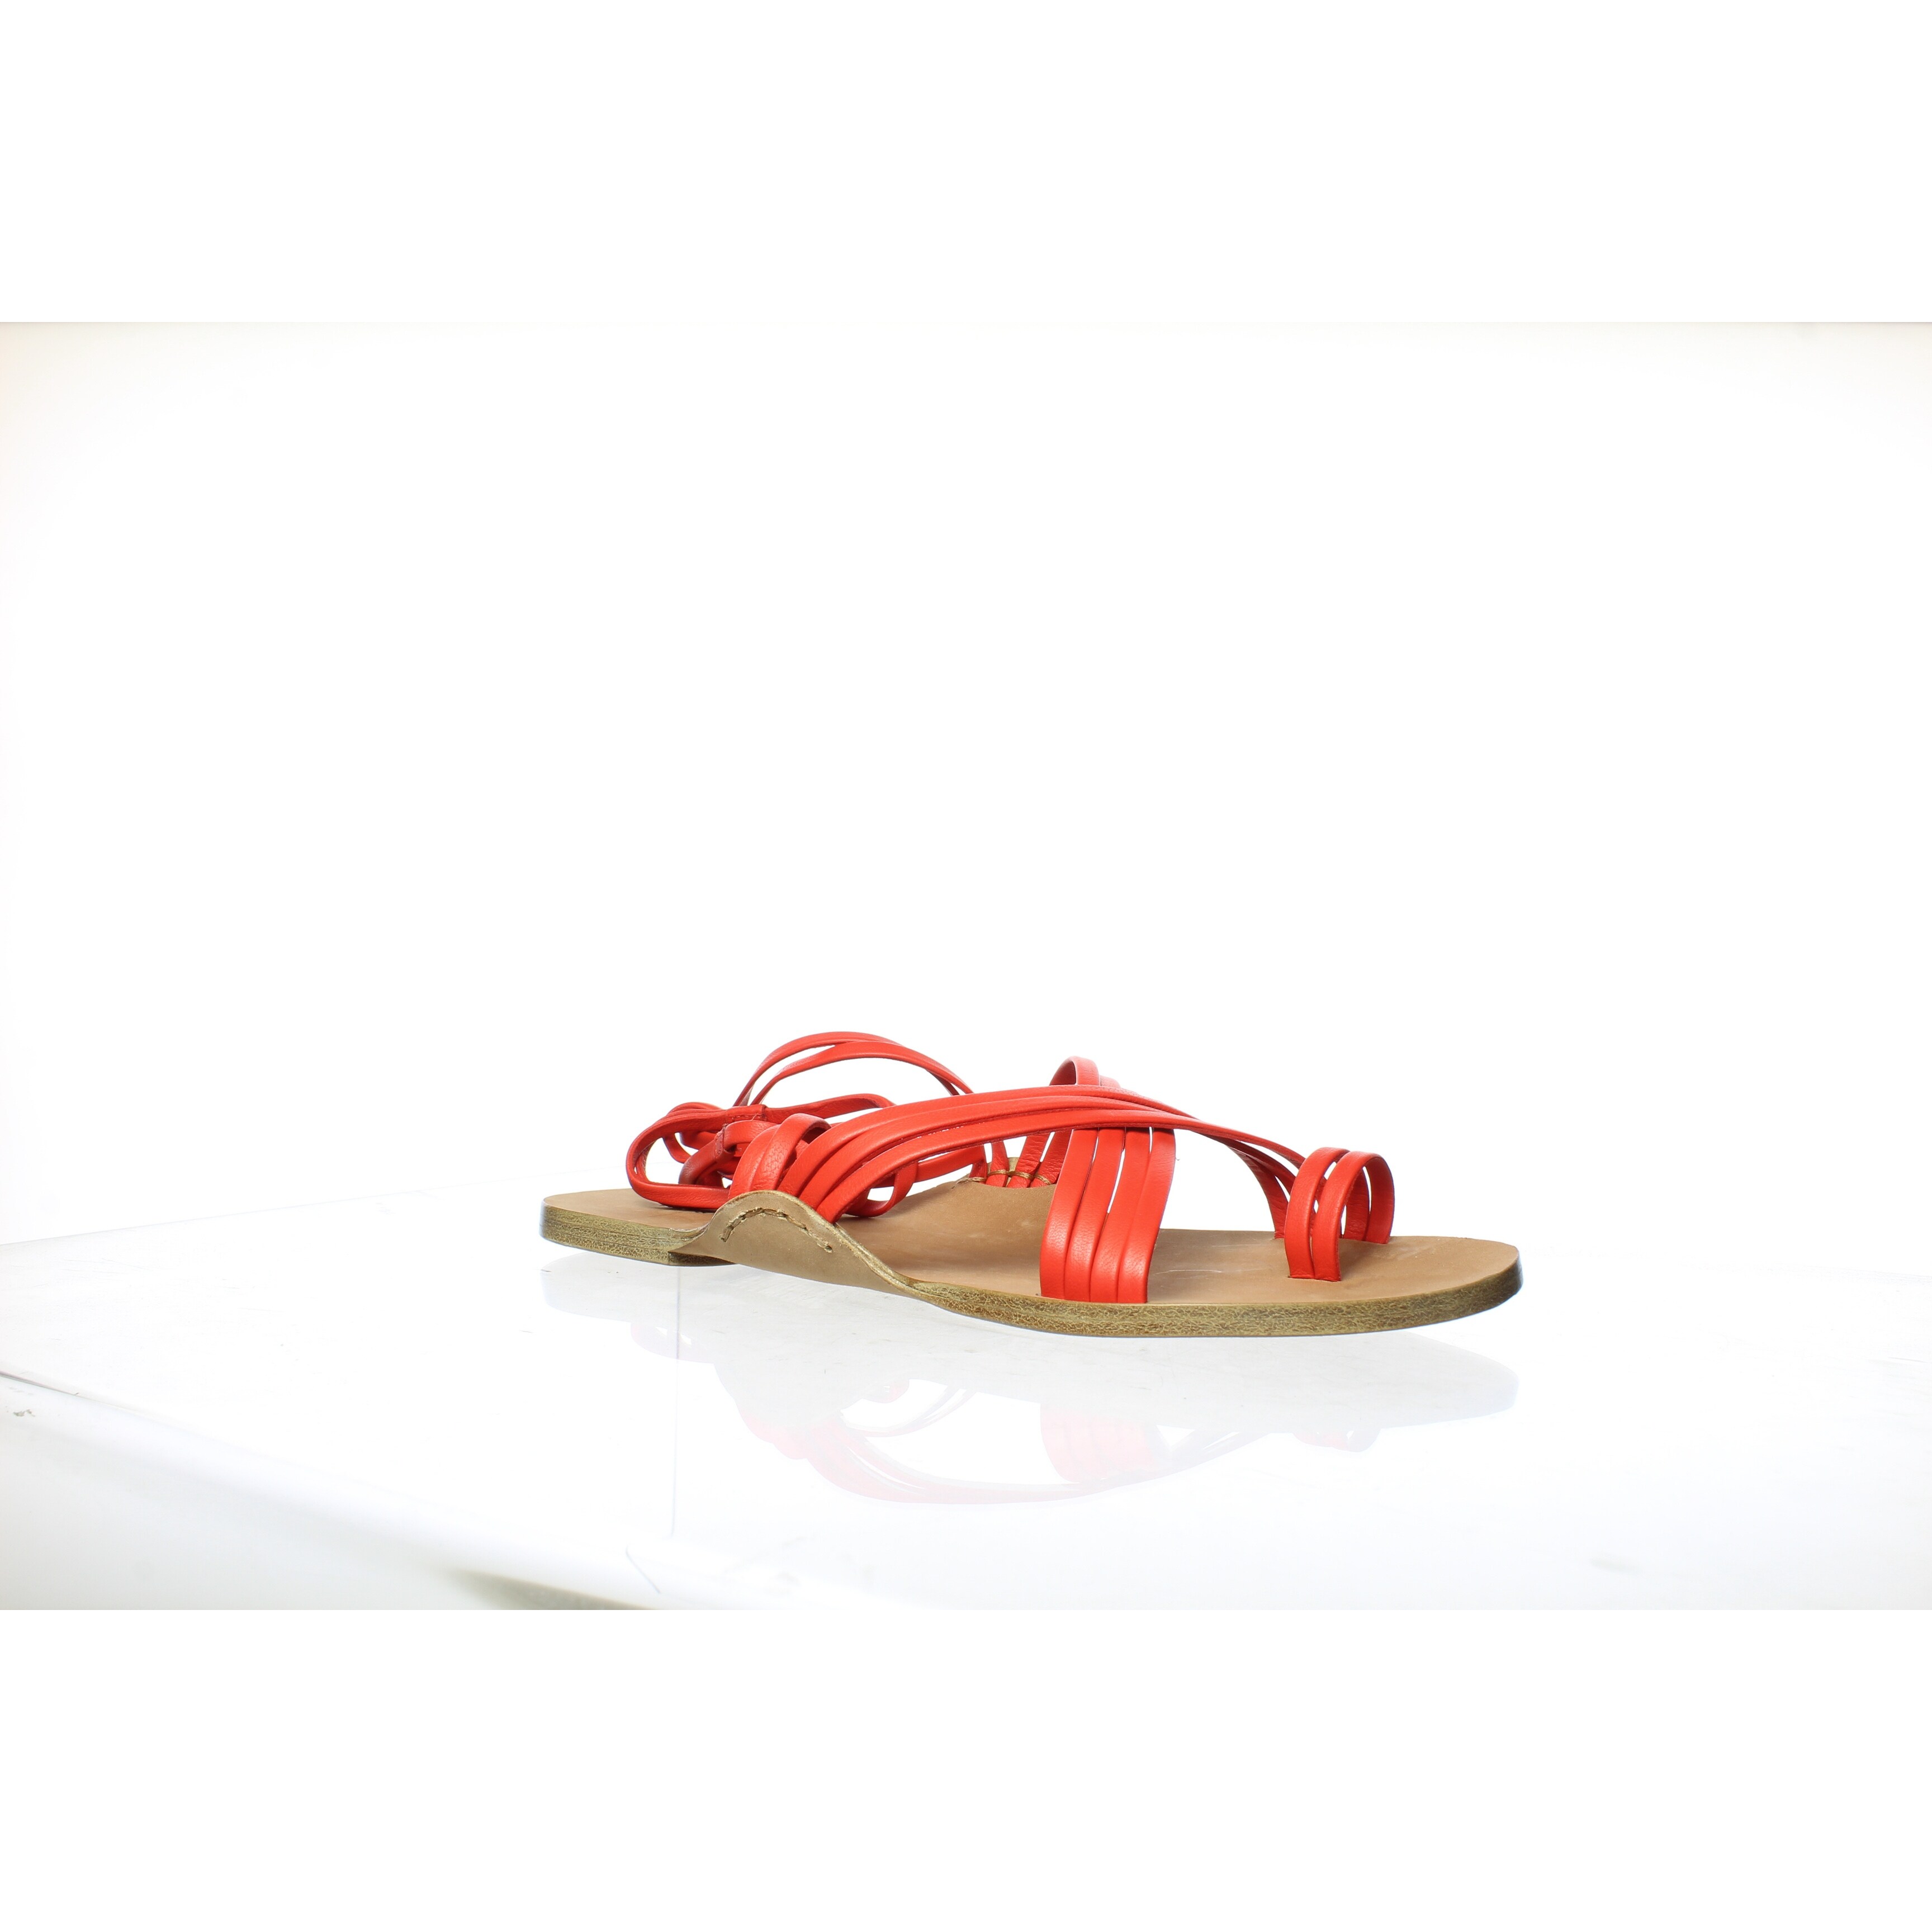 red sandals size 6